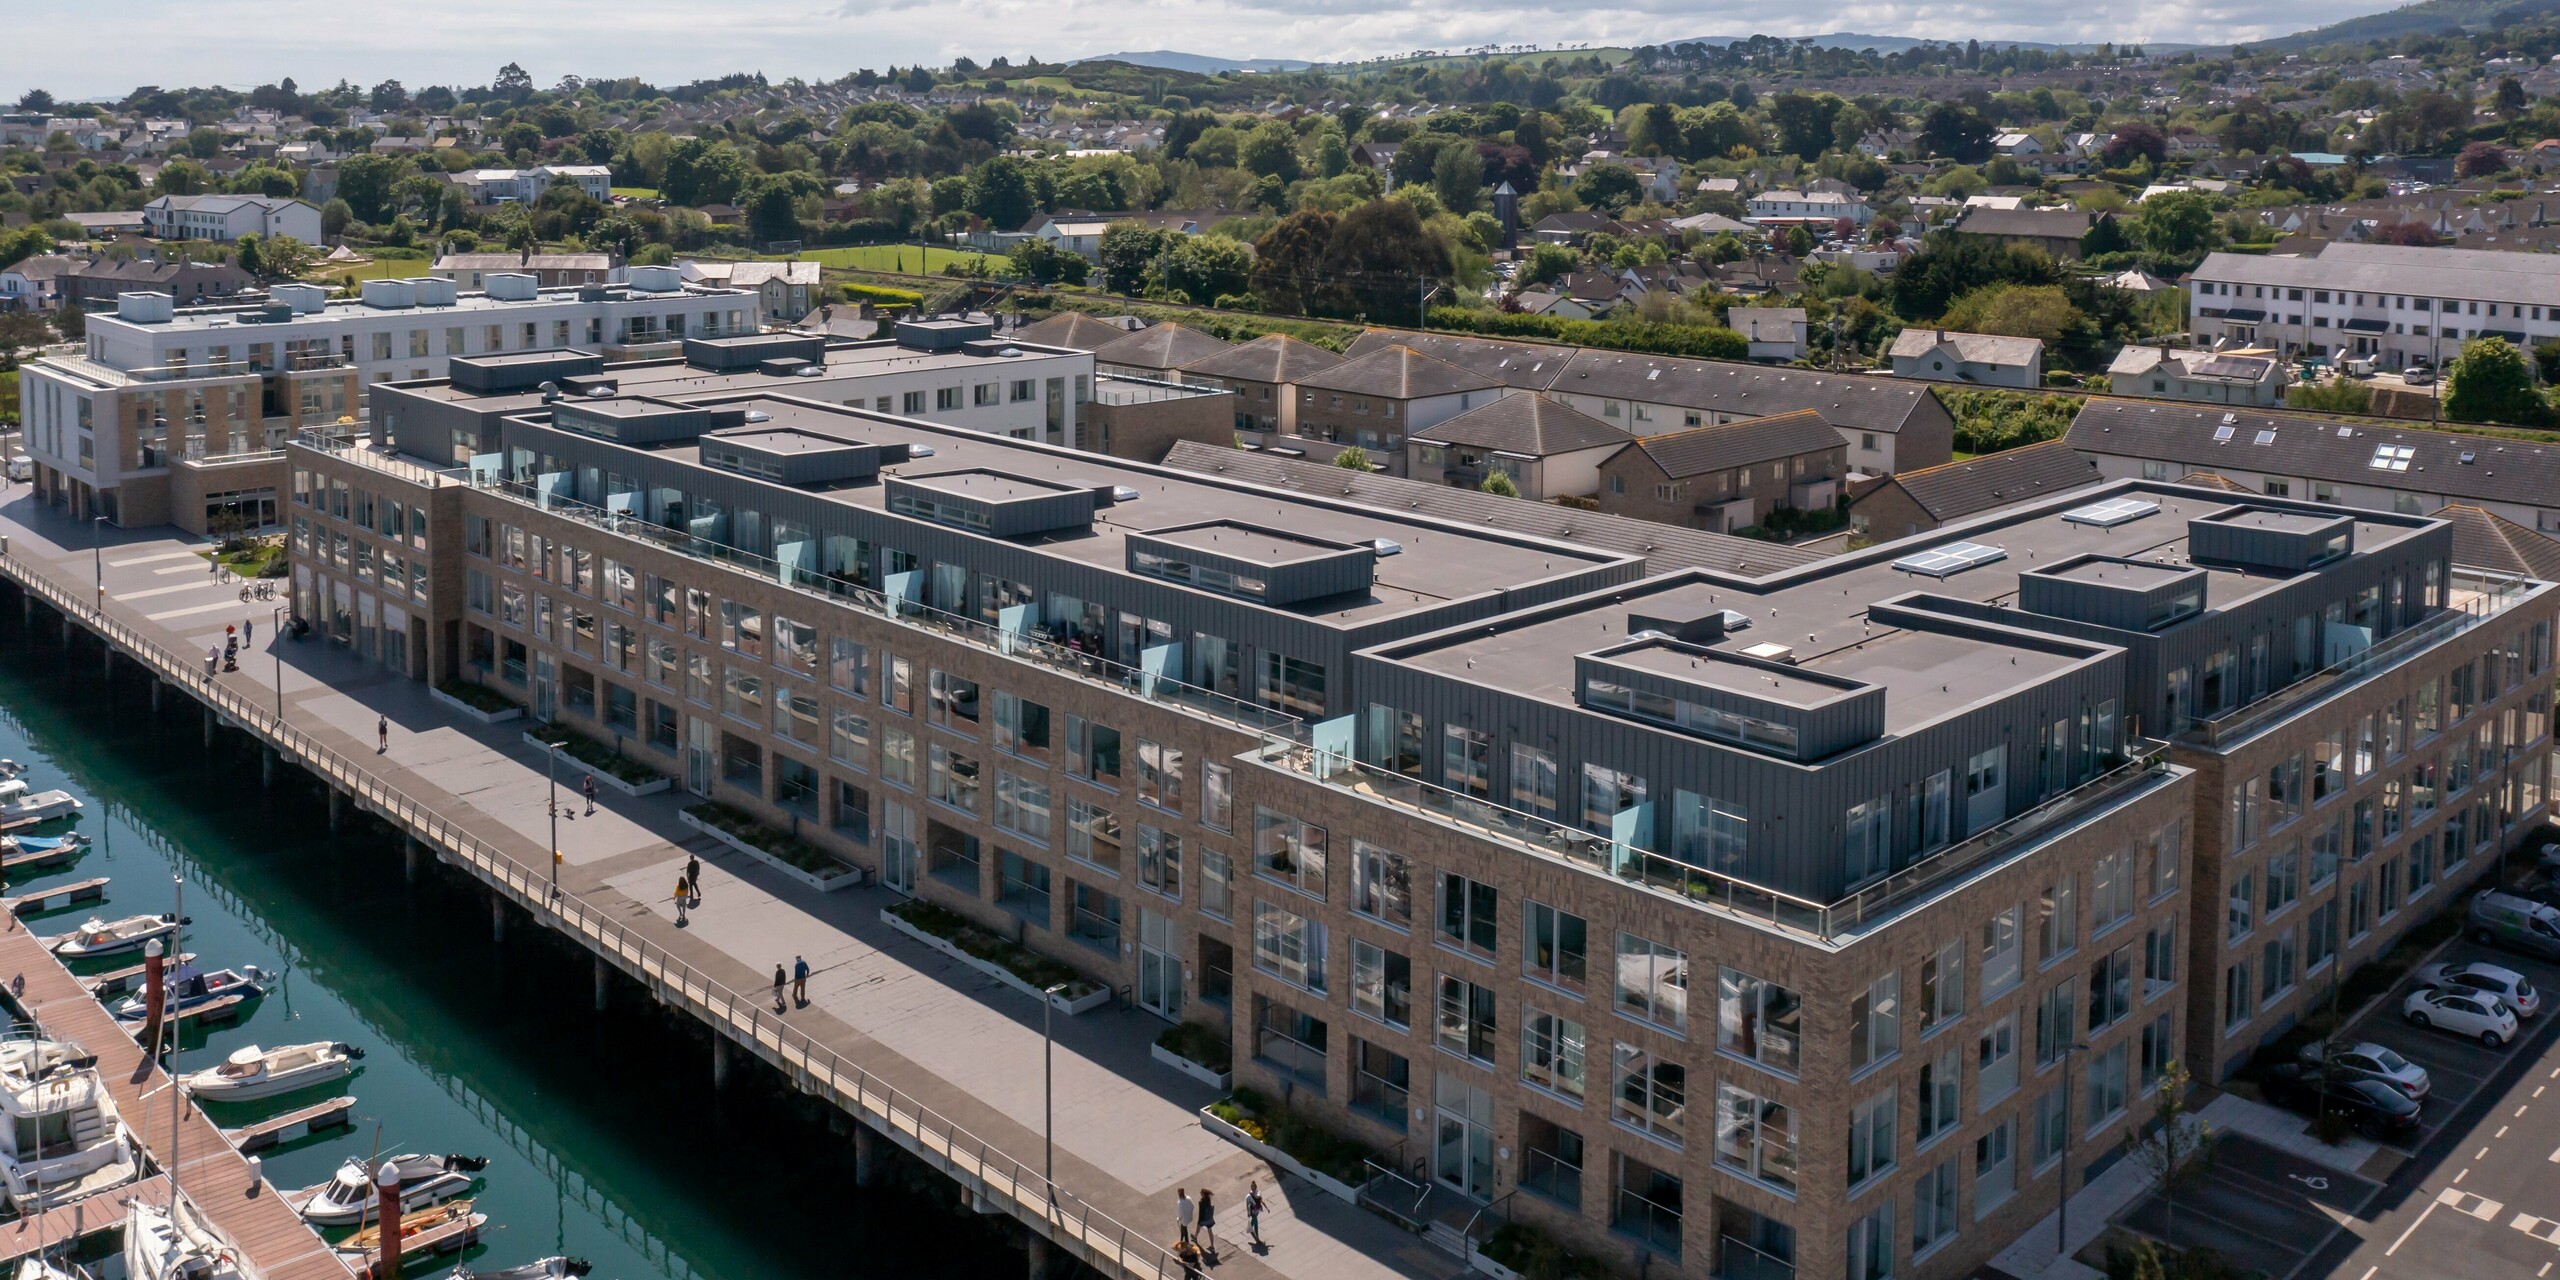 Wide-angle bird's eye view of Marina Village Greystones in Wicklow, Ireland - a modern waterfront residential development directly on the marina. The building complex is clad with robust PREFALZ in P.10 Prefa White and P.10 Light Grey. The elegant architecture includes large glass fronts, spacious balconies and a high quality sheet metal façade design. The use of PREFALZ aluminium provides durable protection and an attractive appearance. Surrounded by a picturesque landscape, the residential project represents exclusive living by the sea.